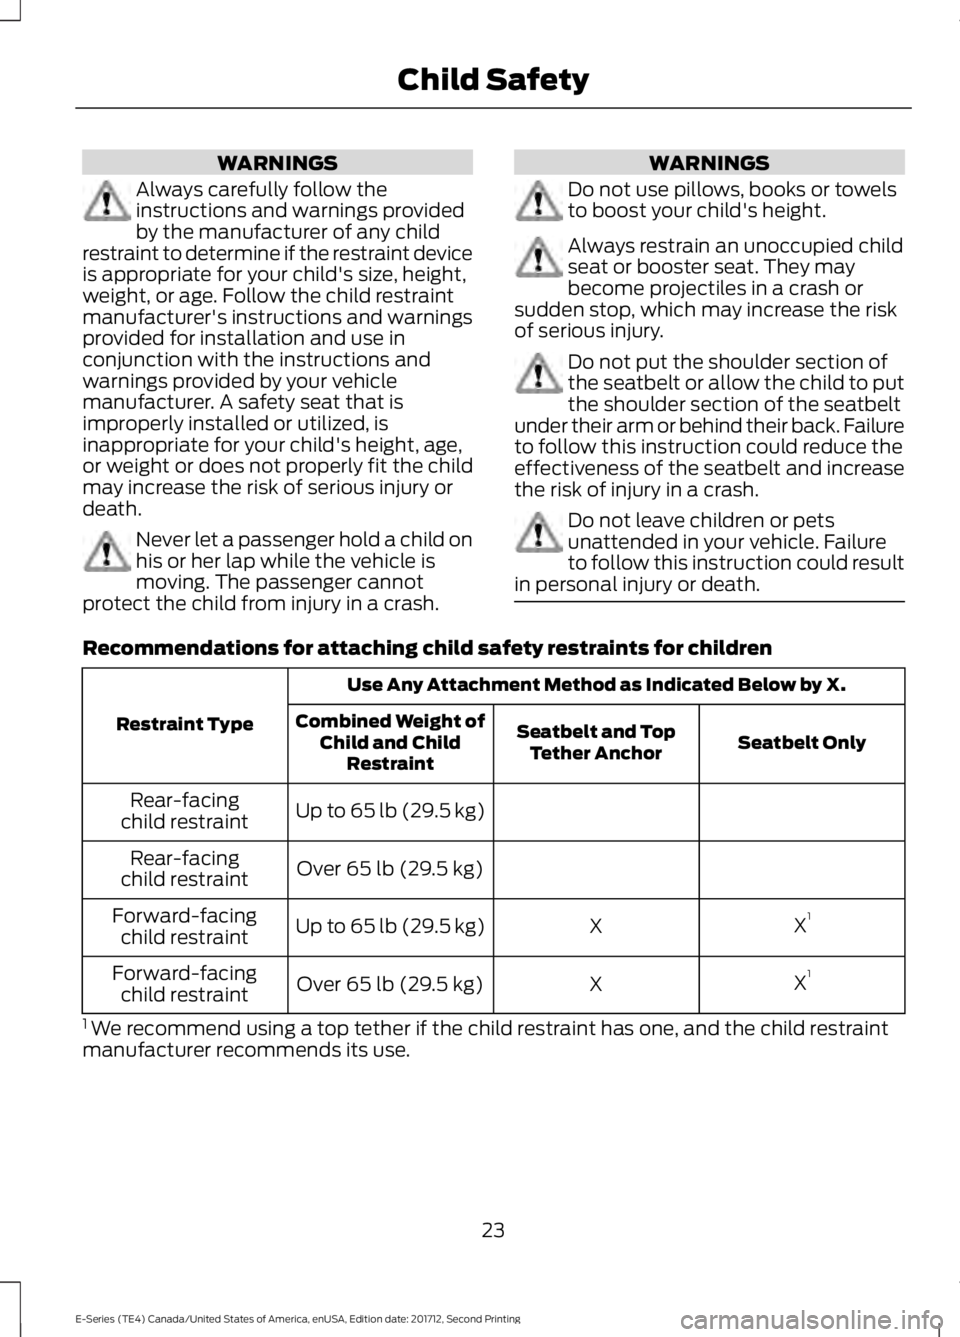 FORD E-450 2018 Owners Manual WARNINGS
Always carefully follow the
instructions and warnings provided
by the manufacturer of any child
restraint to determine if the restraint device
is appropriate for your child's size, height